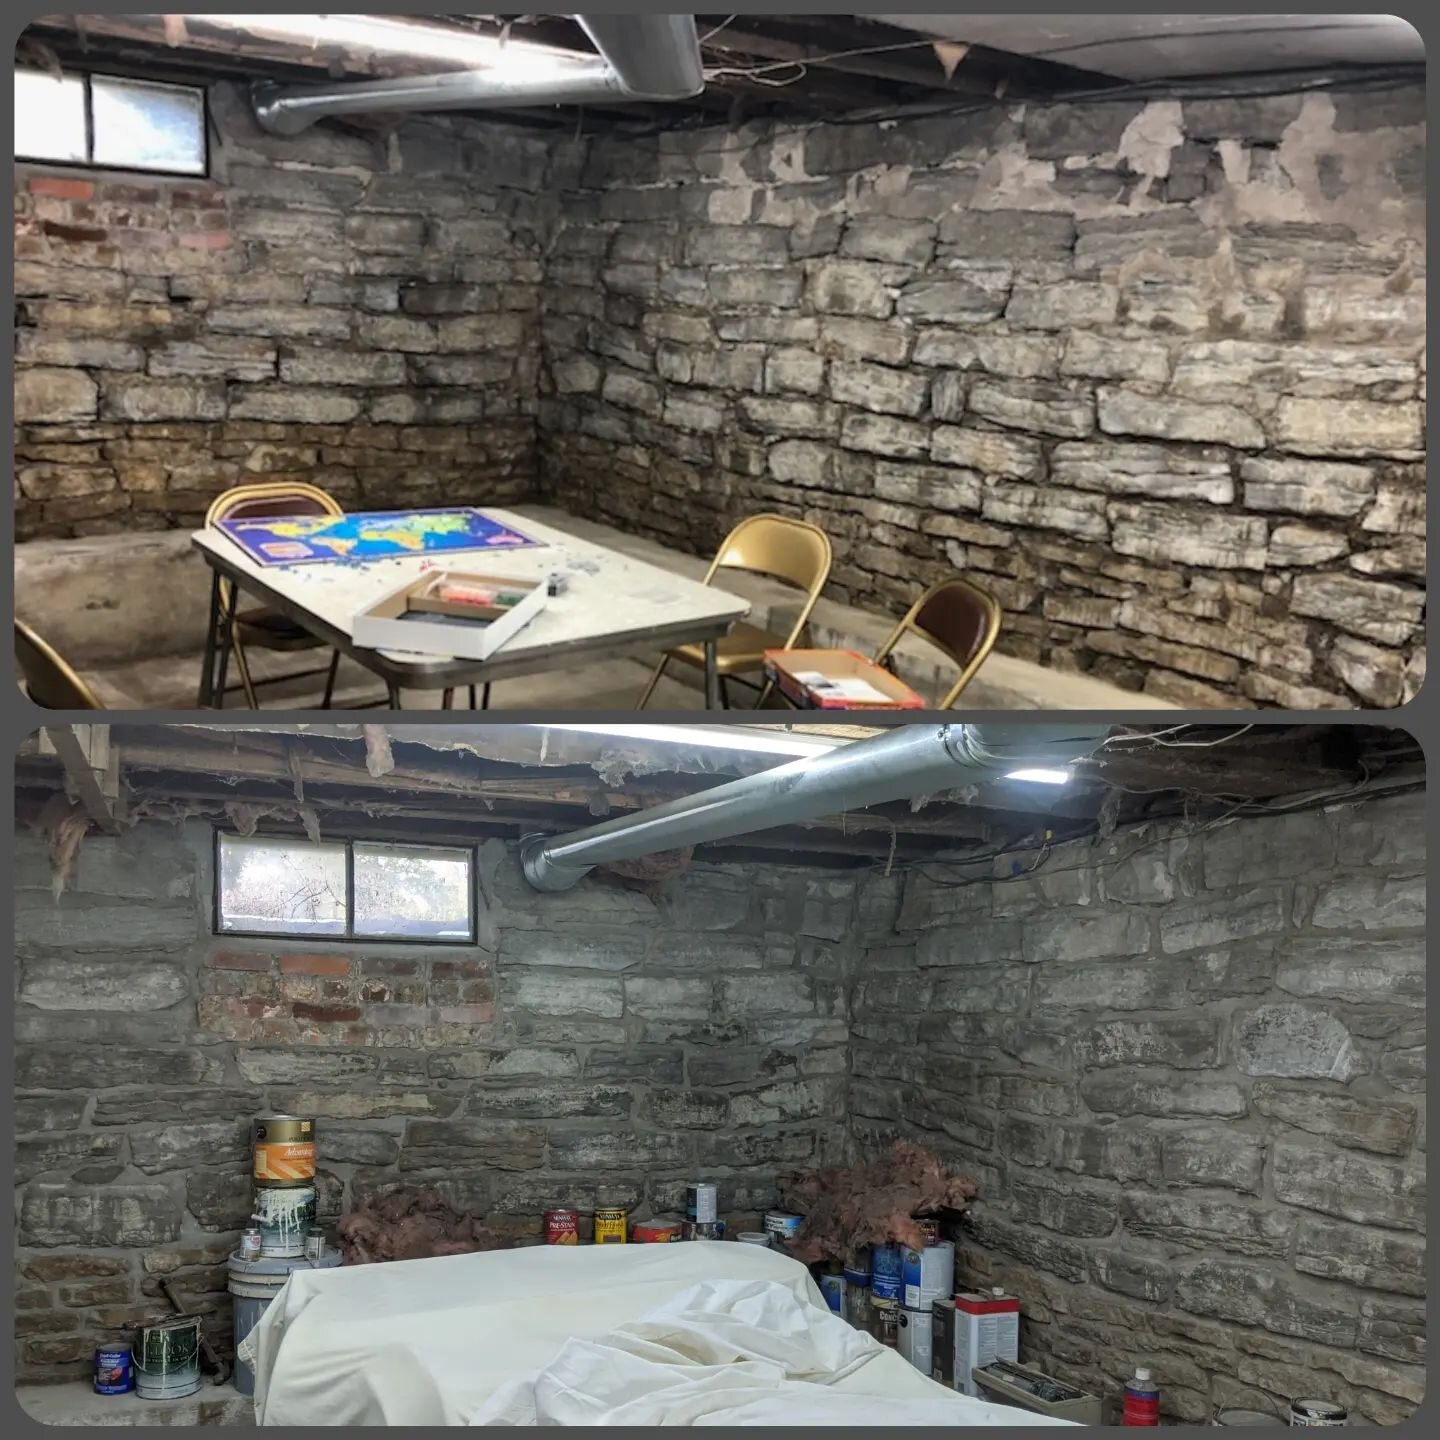 This stone basement was built when horse and buggy was how you get late night taco bell.

We cleaned the surface of all the stones then chiseled the joints out and regrouted everything. These are the before and after pics. Now it's much more homey...